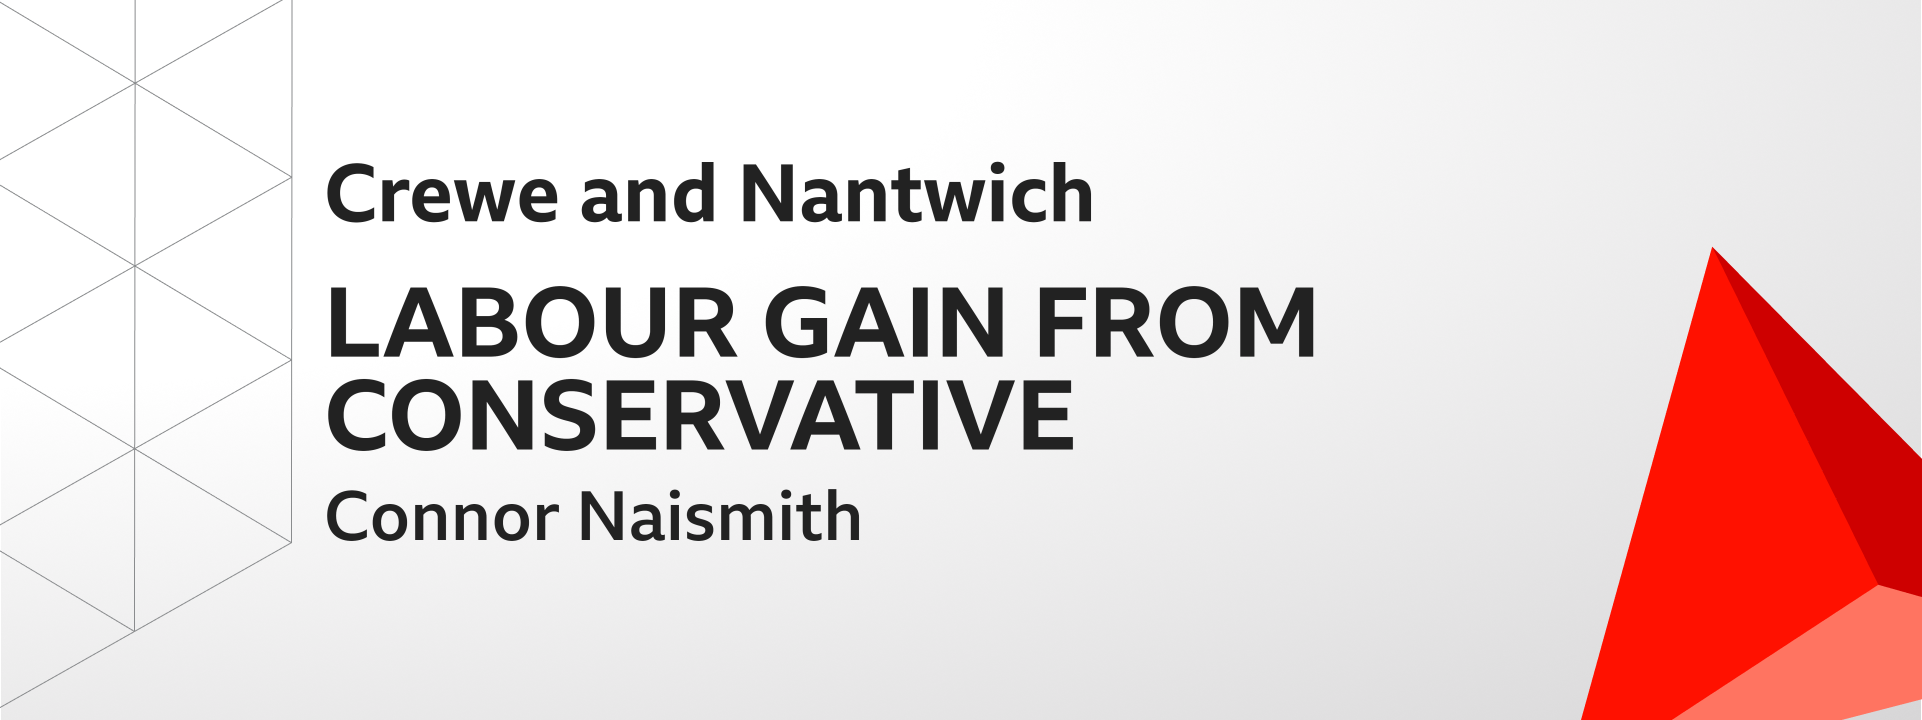 Graphic showing Labour gains Crewe and Nantwich from the Conservatives. The winning candidate was Connor Naismith.